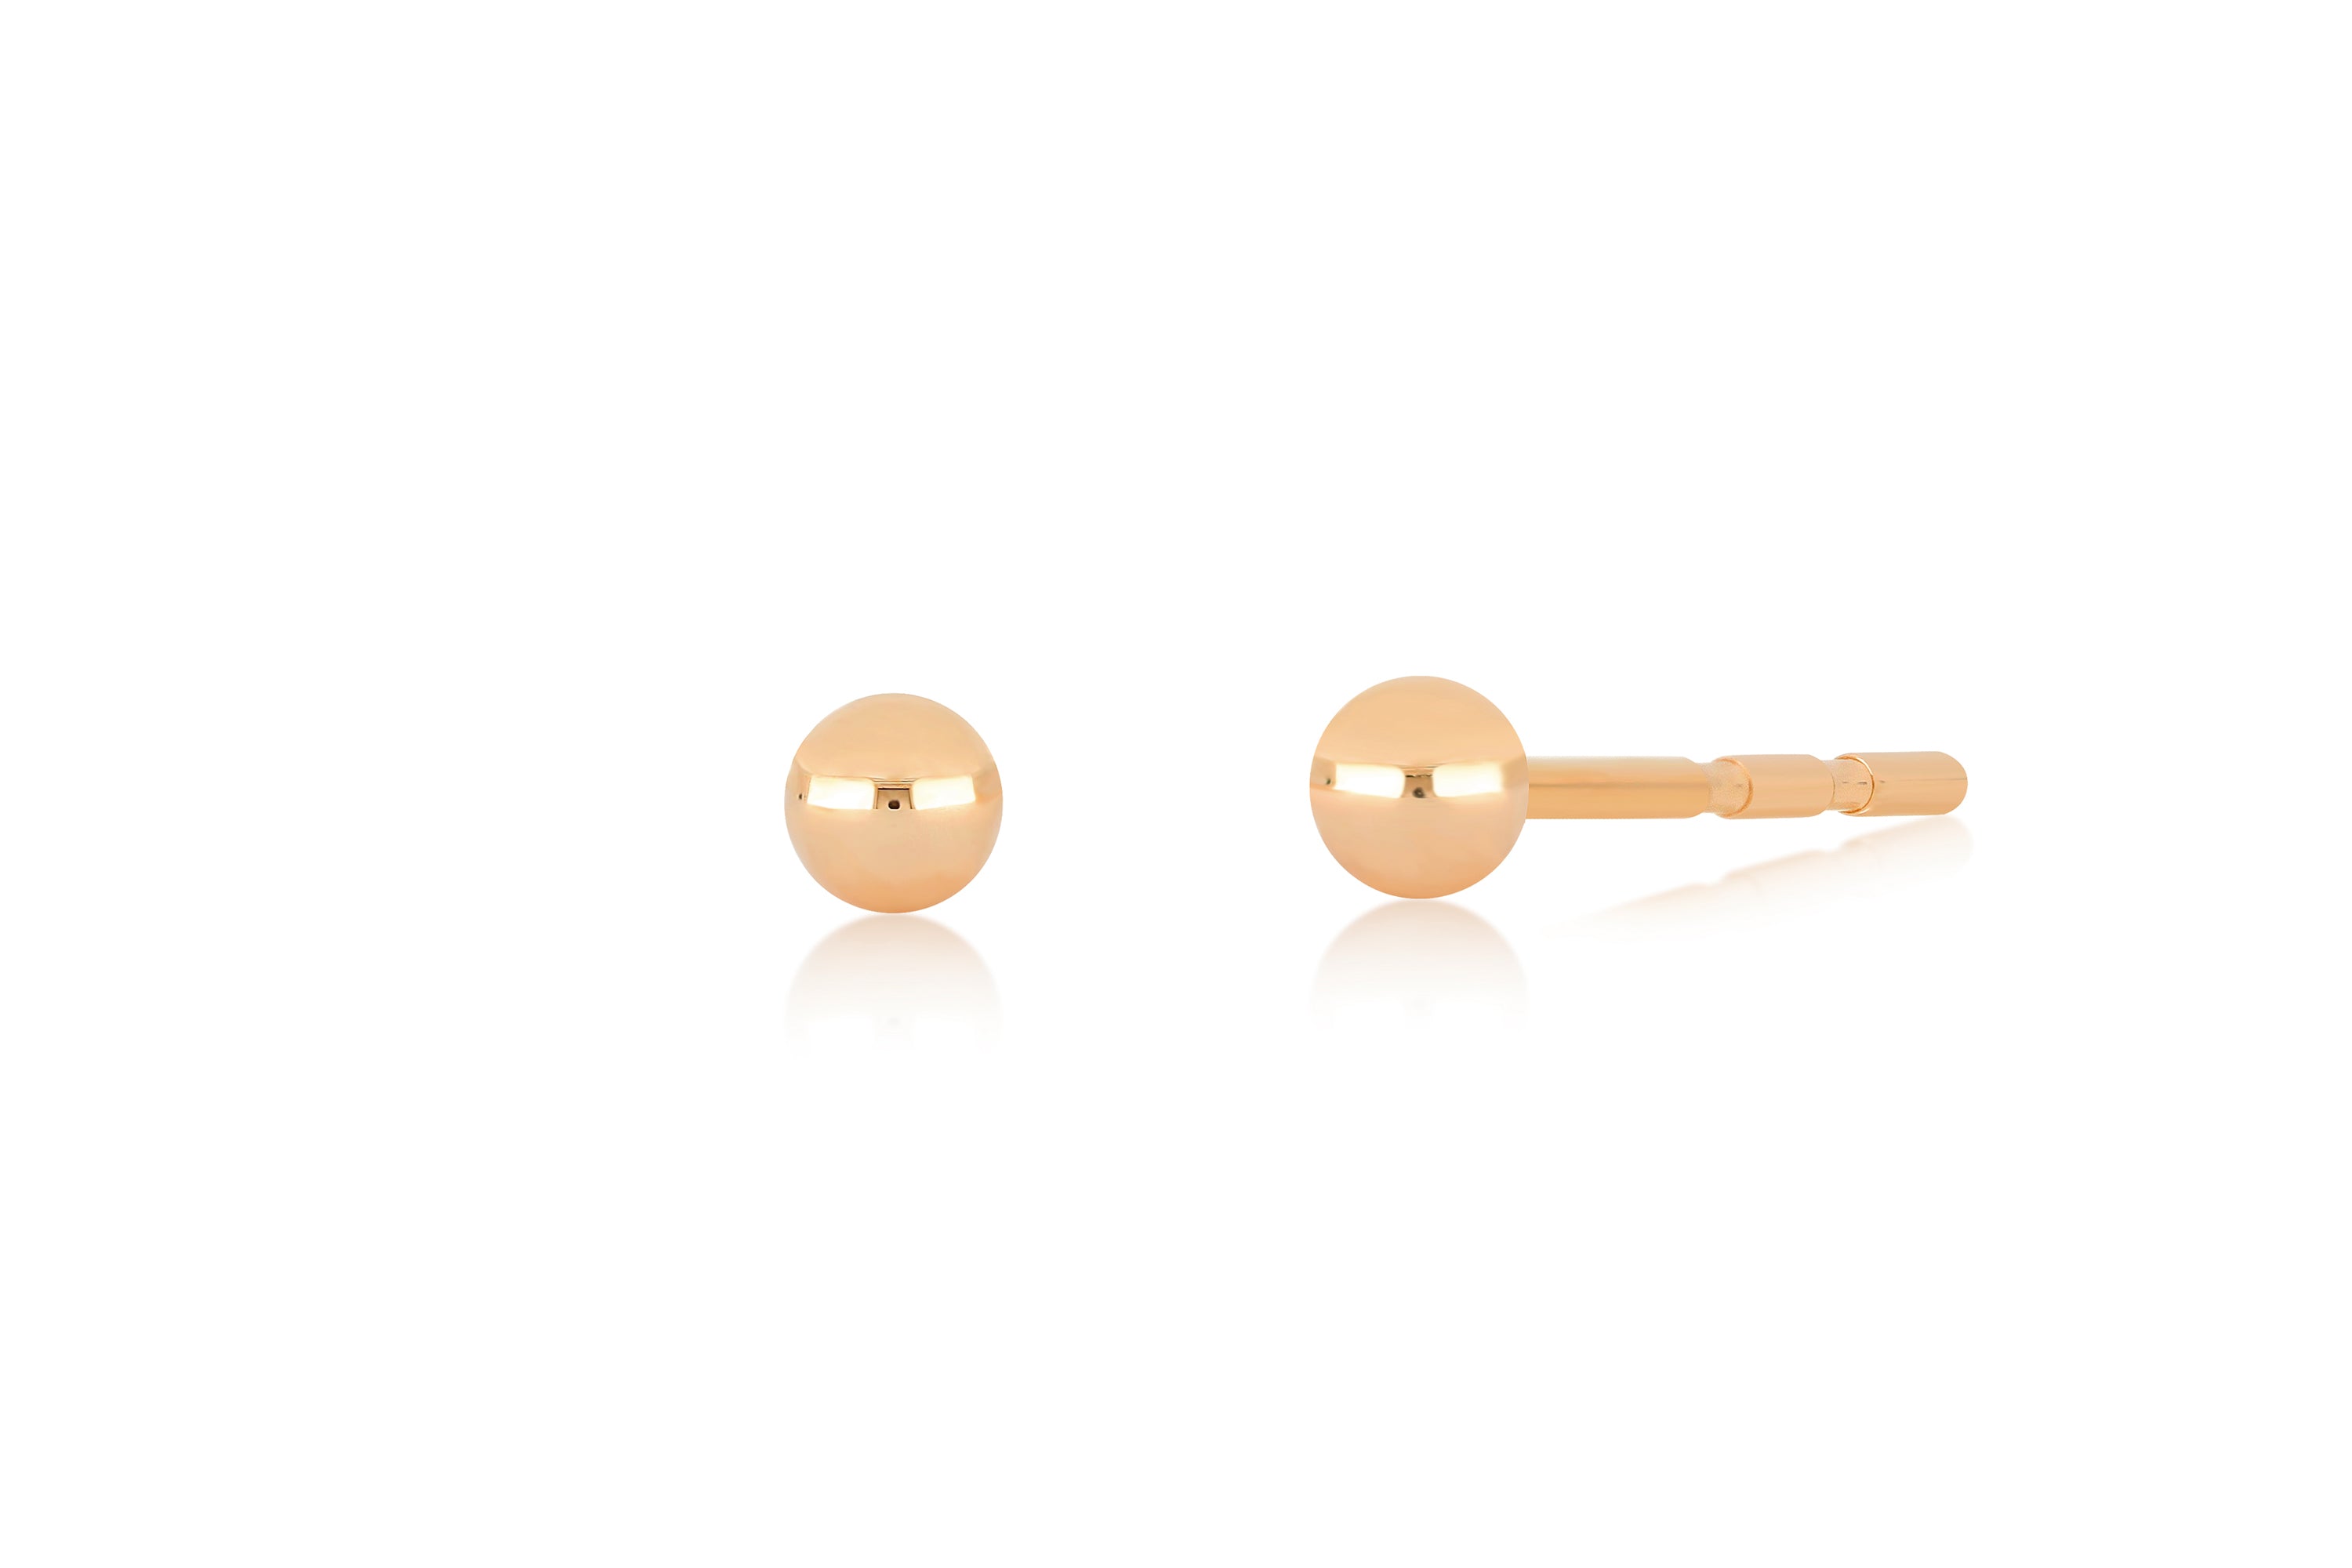 14k (karat) rose gold ball stud earring measuring 3mm in height and width